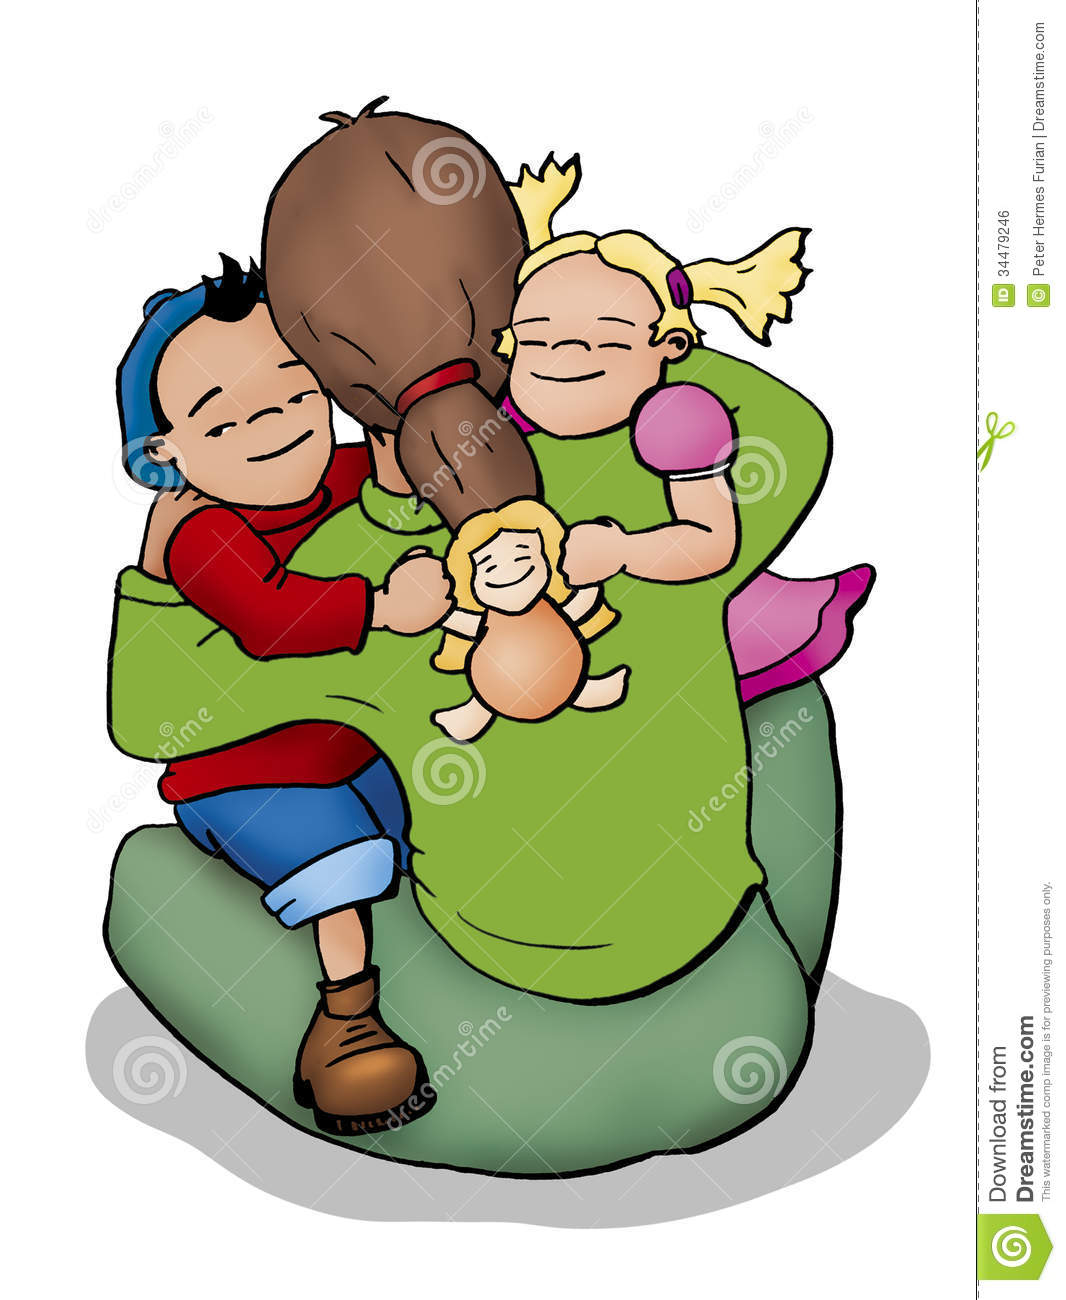 Illustration Of A Mother A Boy And A Girl Hugging